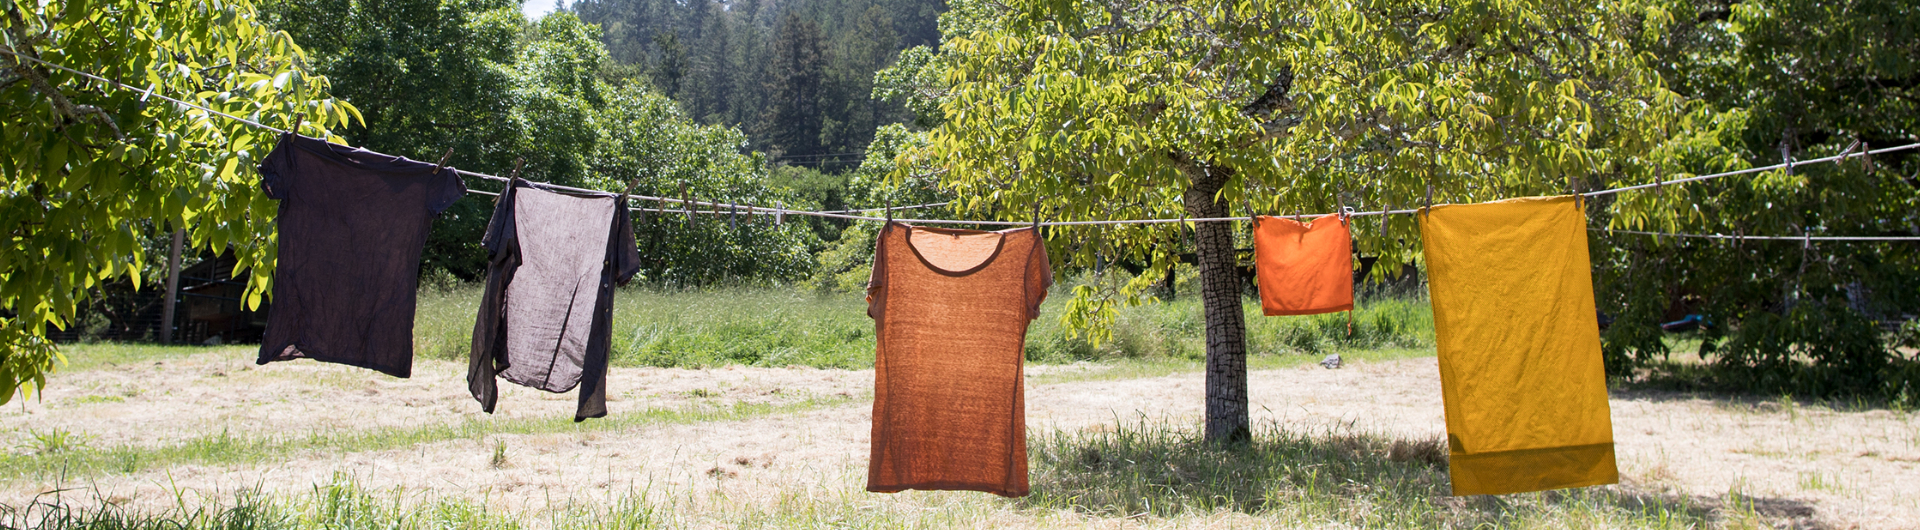 naturally dyed clothes on a clothes line